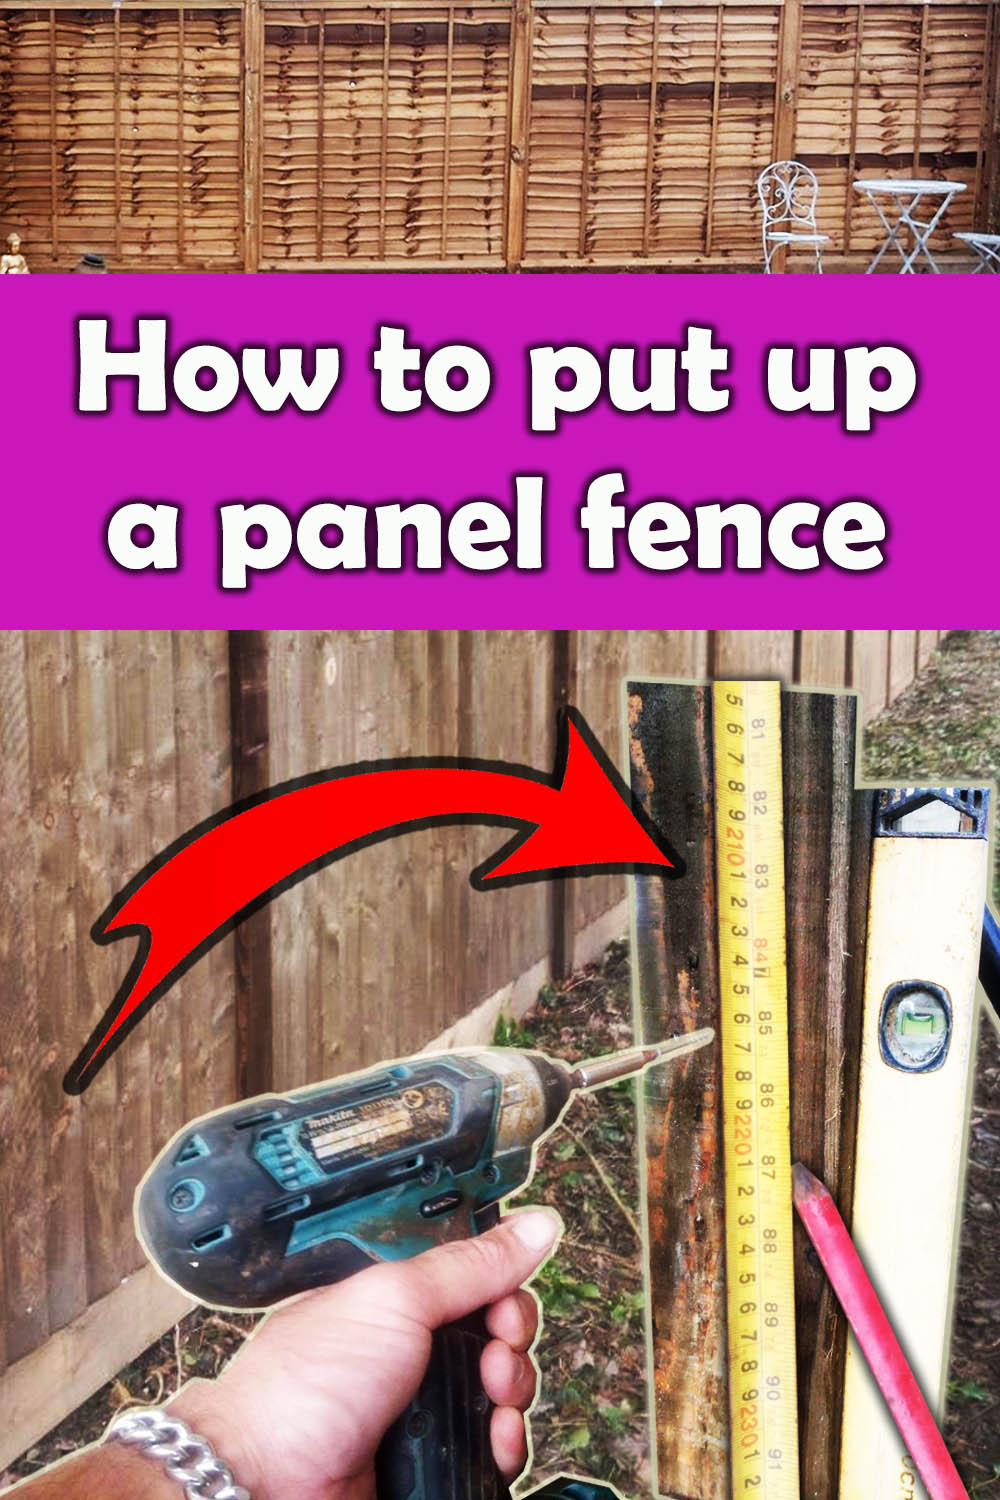 How to put up fence panels